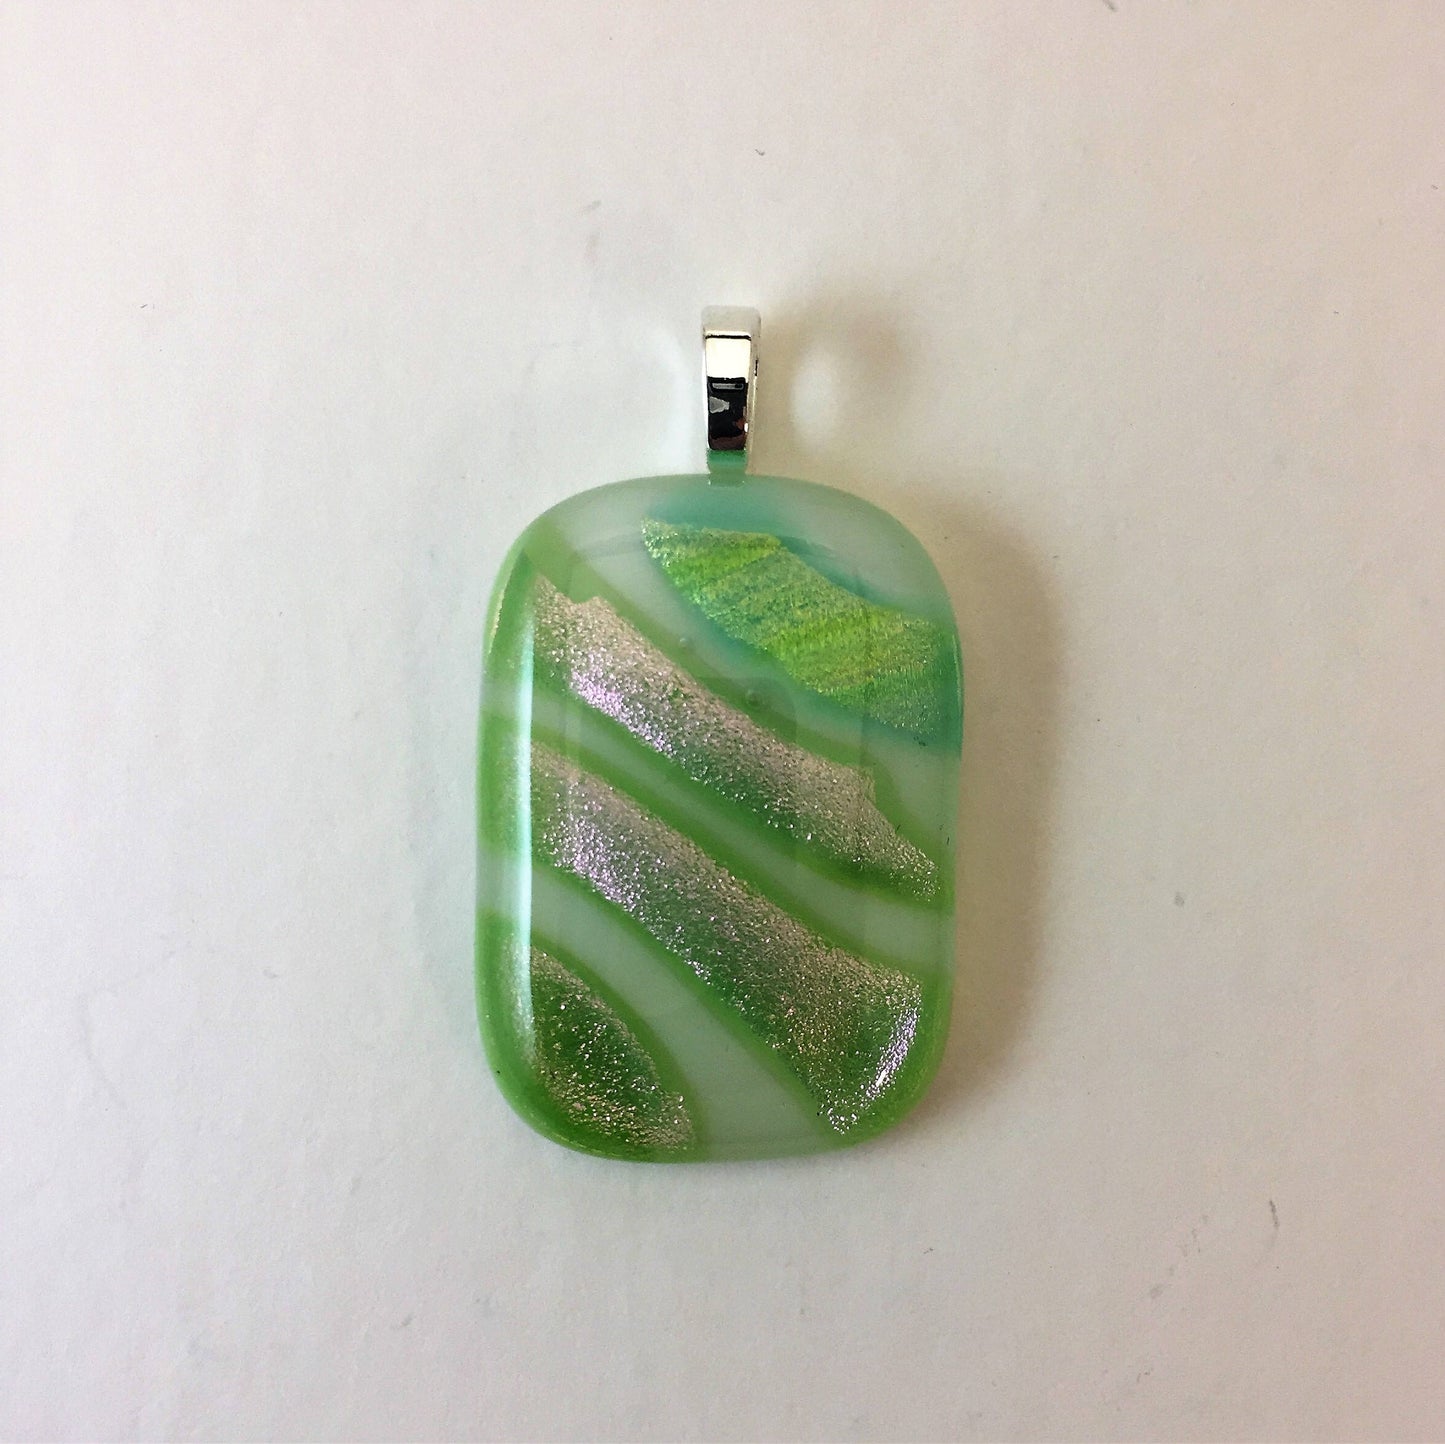 Diagonal Dichroic Pink on Green Fused Glass Pendant